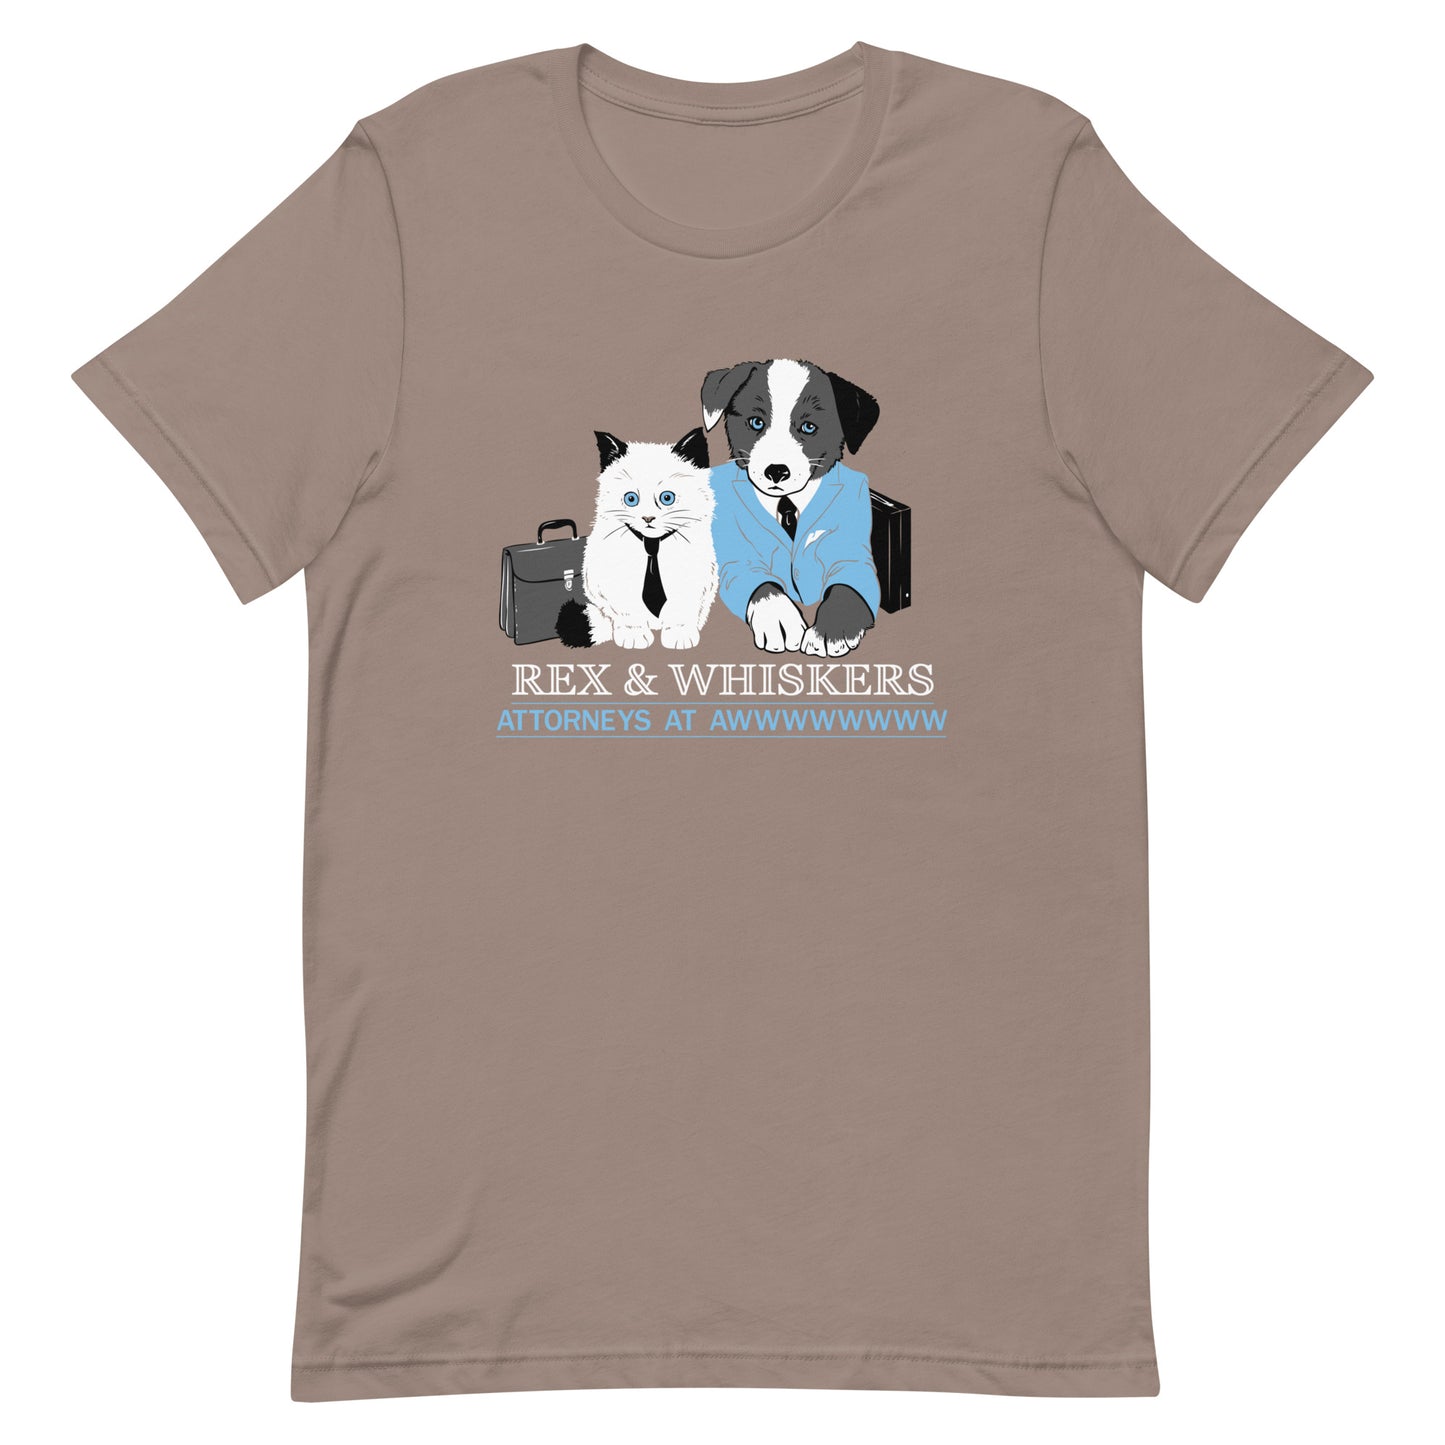 Rex and Whiskers Attorneys Men's Signature Tee